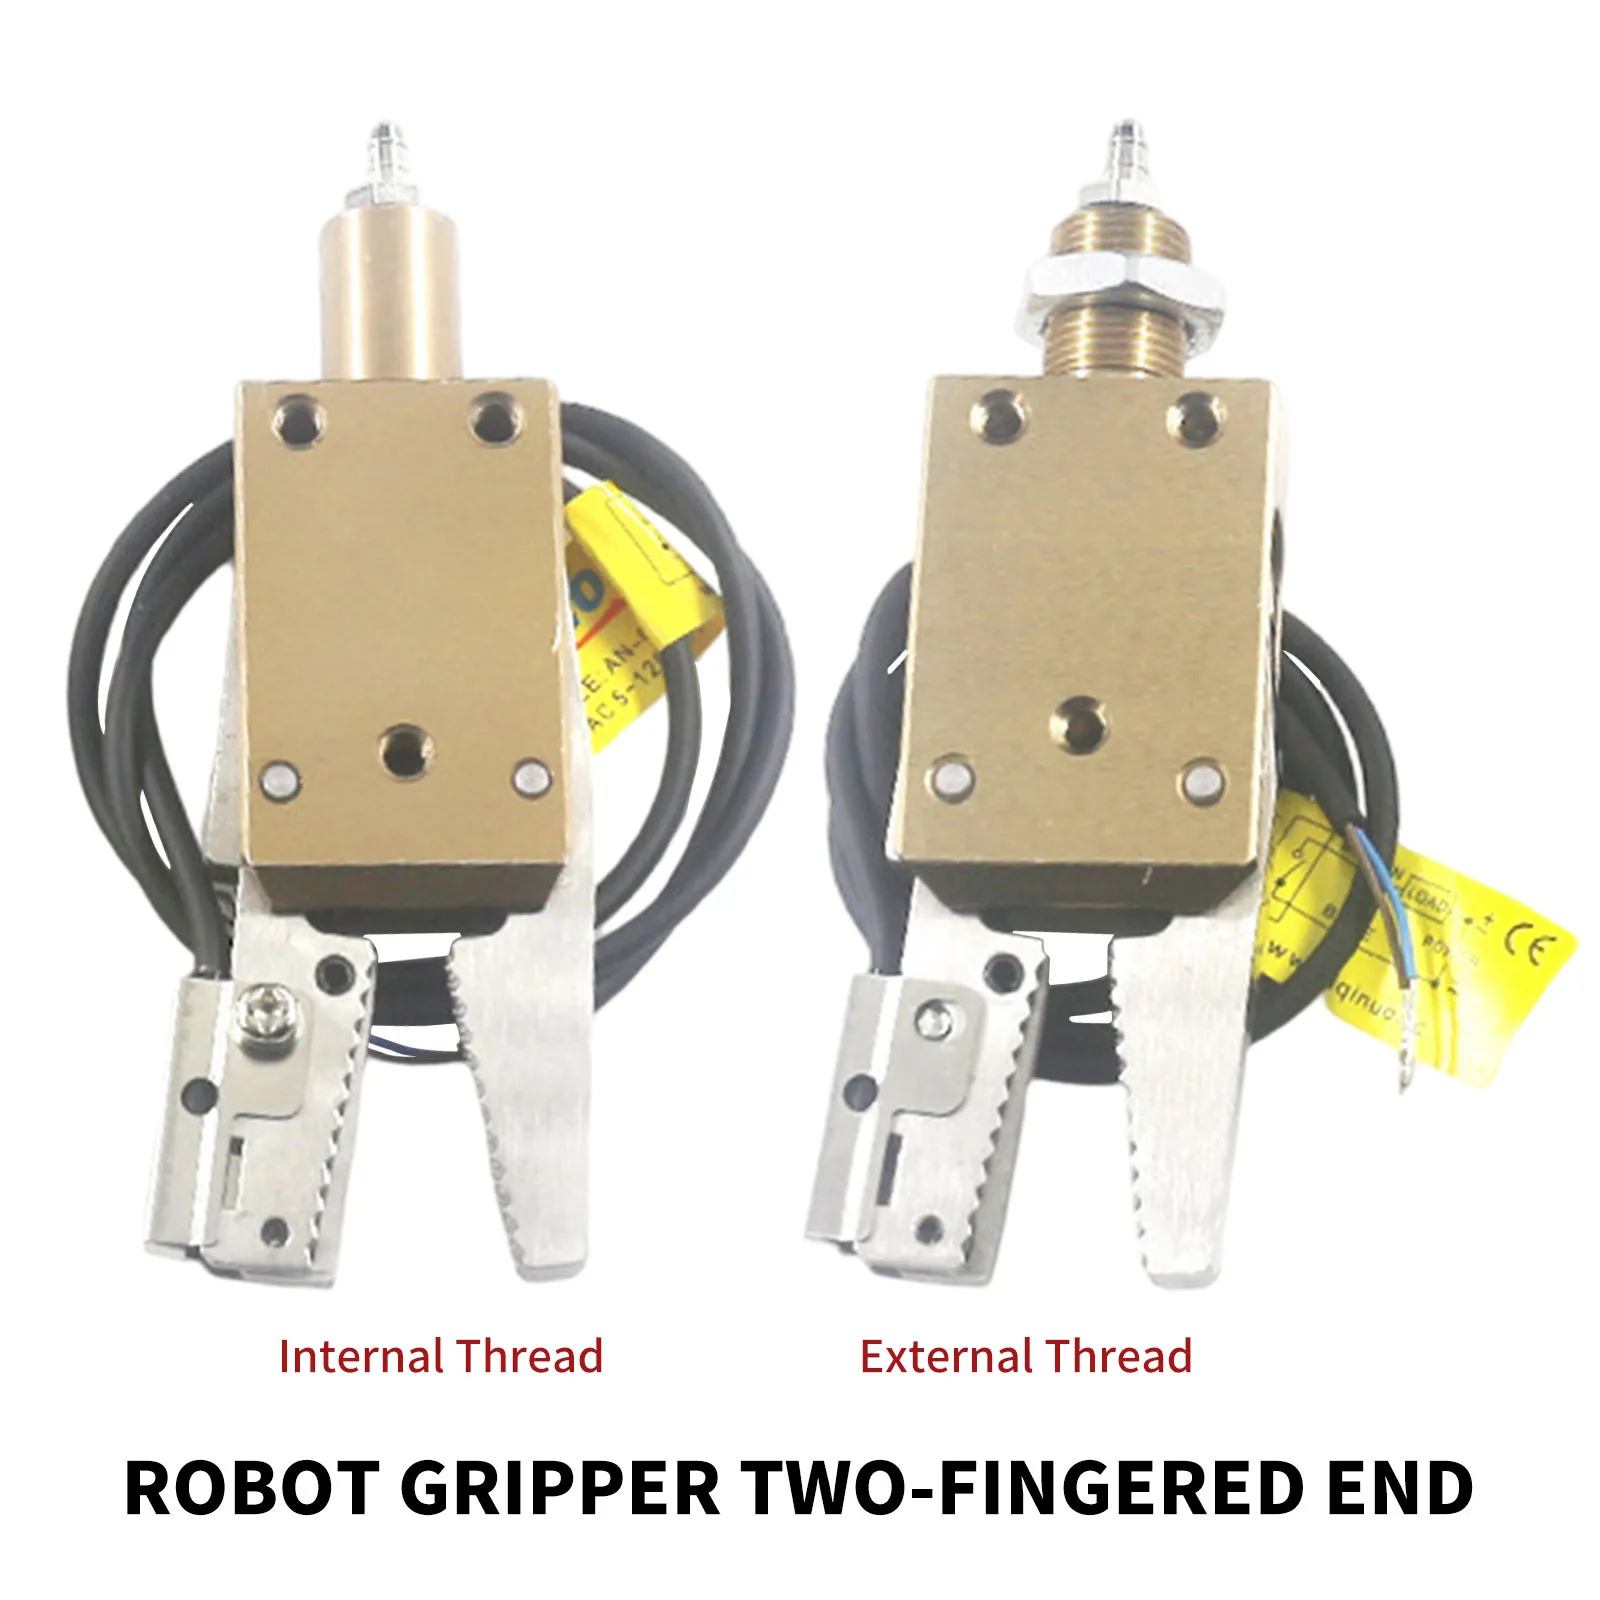 

Robot Gripper Two-Fingered End of Arm Tooling Replacement for External Thread for Internal Thread